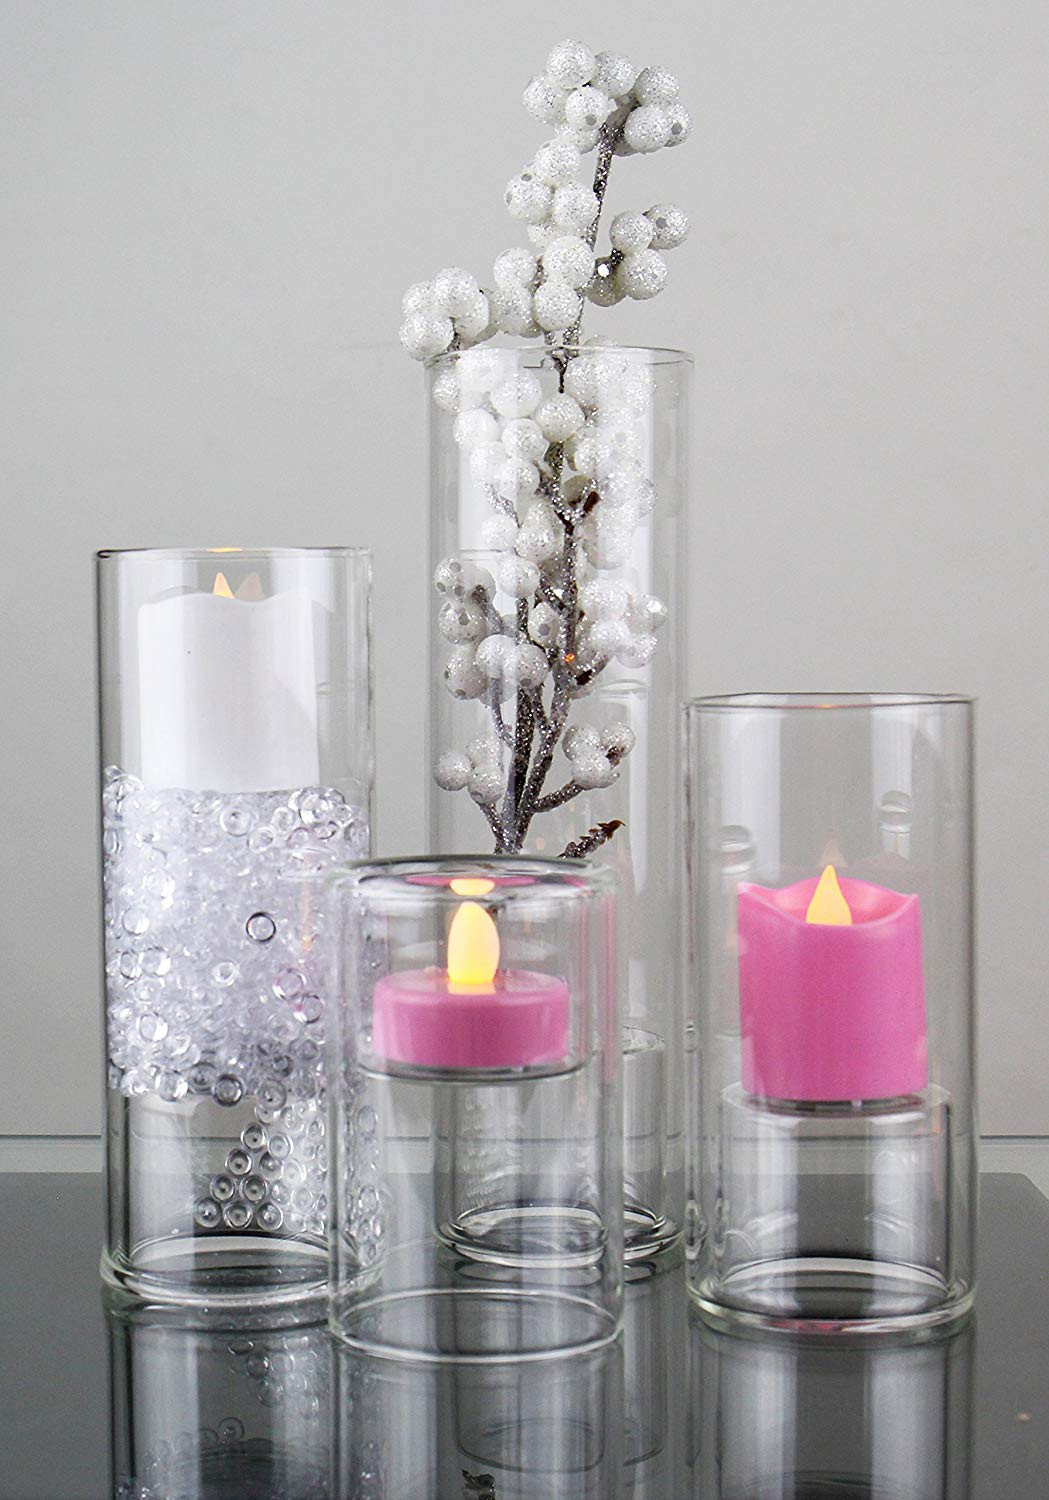 23 attractive Eastland Glass Cylinder Vases Set Of 4 2024 free download eastland glass cylinder vases set of 4 of amazon com cys excel 8 piper tealight glass candle holders 6 pcs throughout amazon com cys excel 8 piper tealight glass candle holders 6 pcs home ki